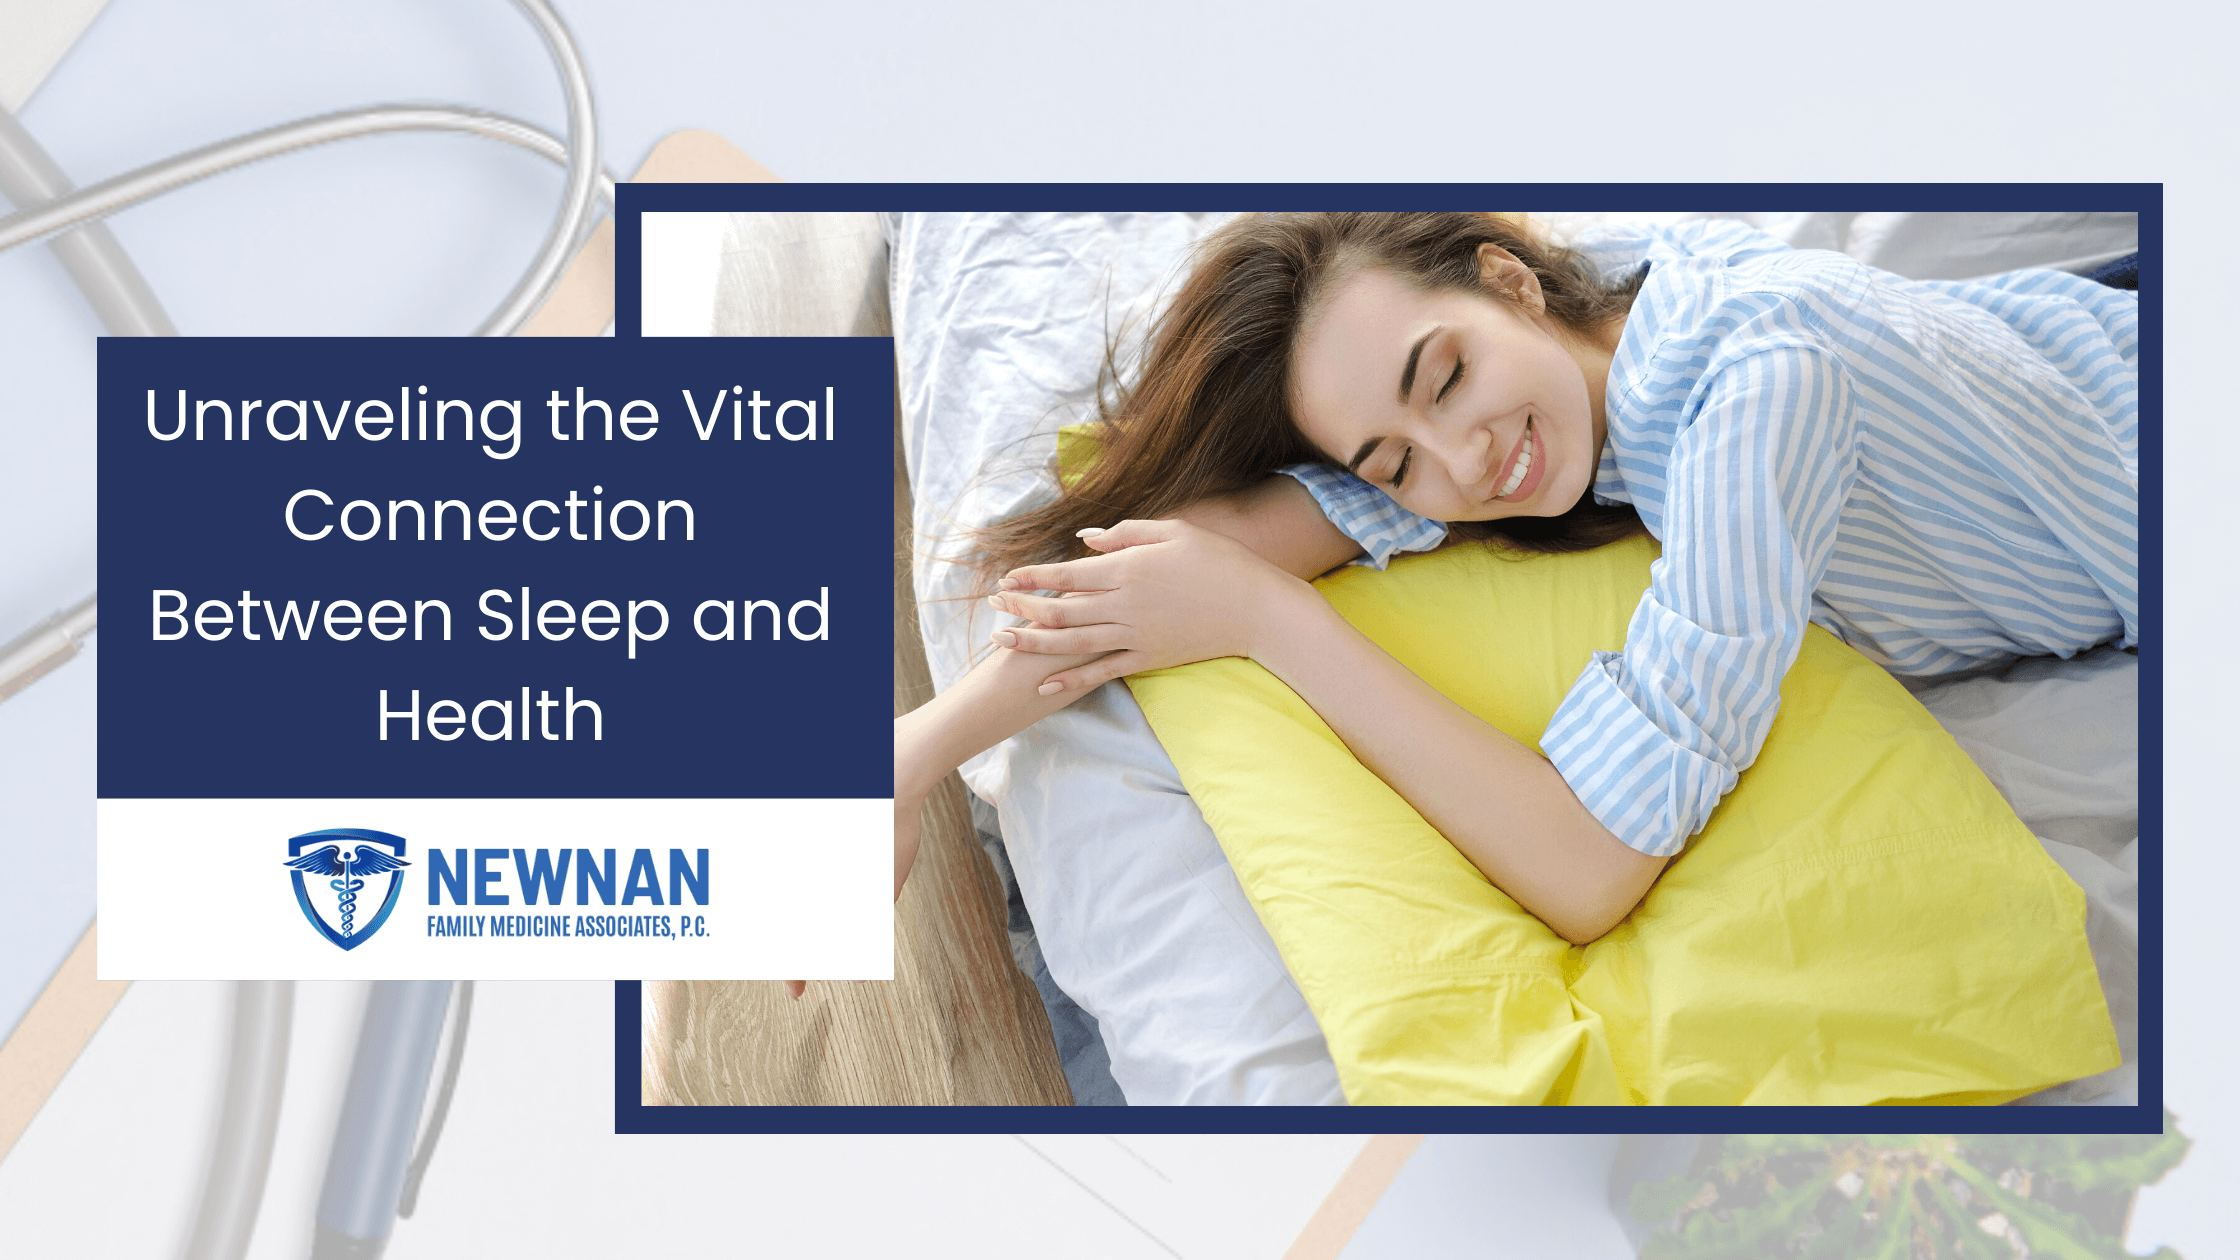 Unraveling the Vital Connection Between Sleep and Health